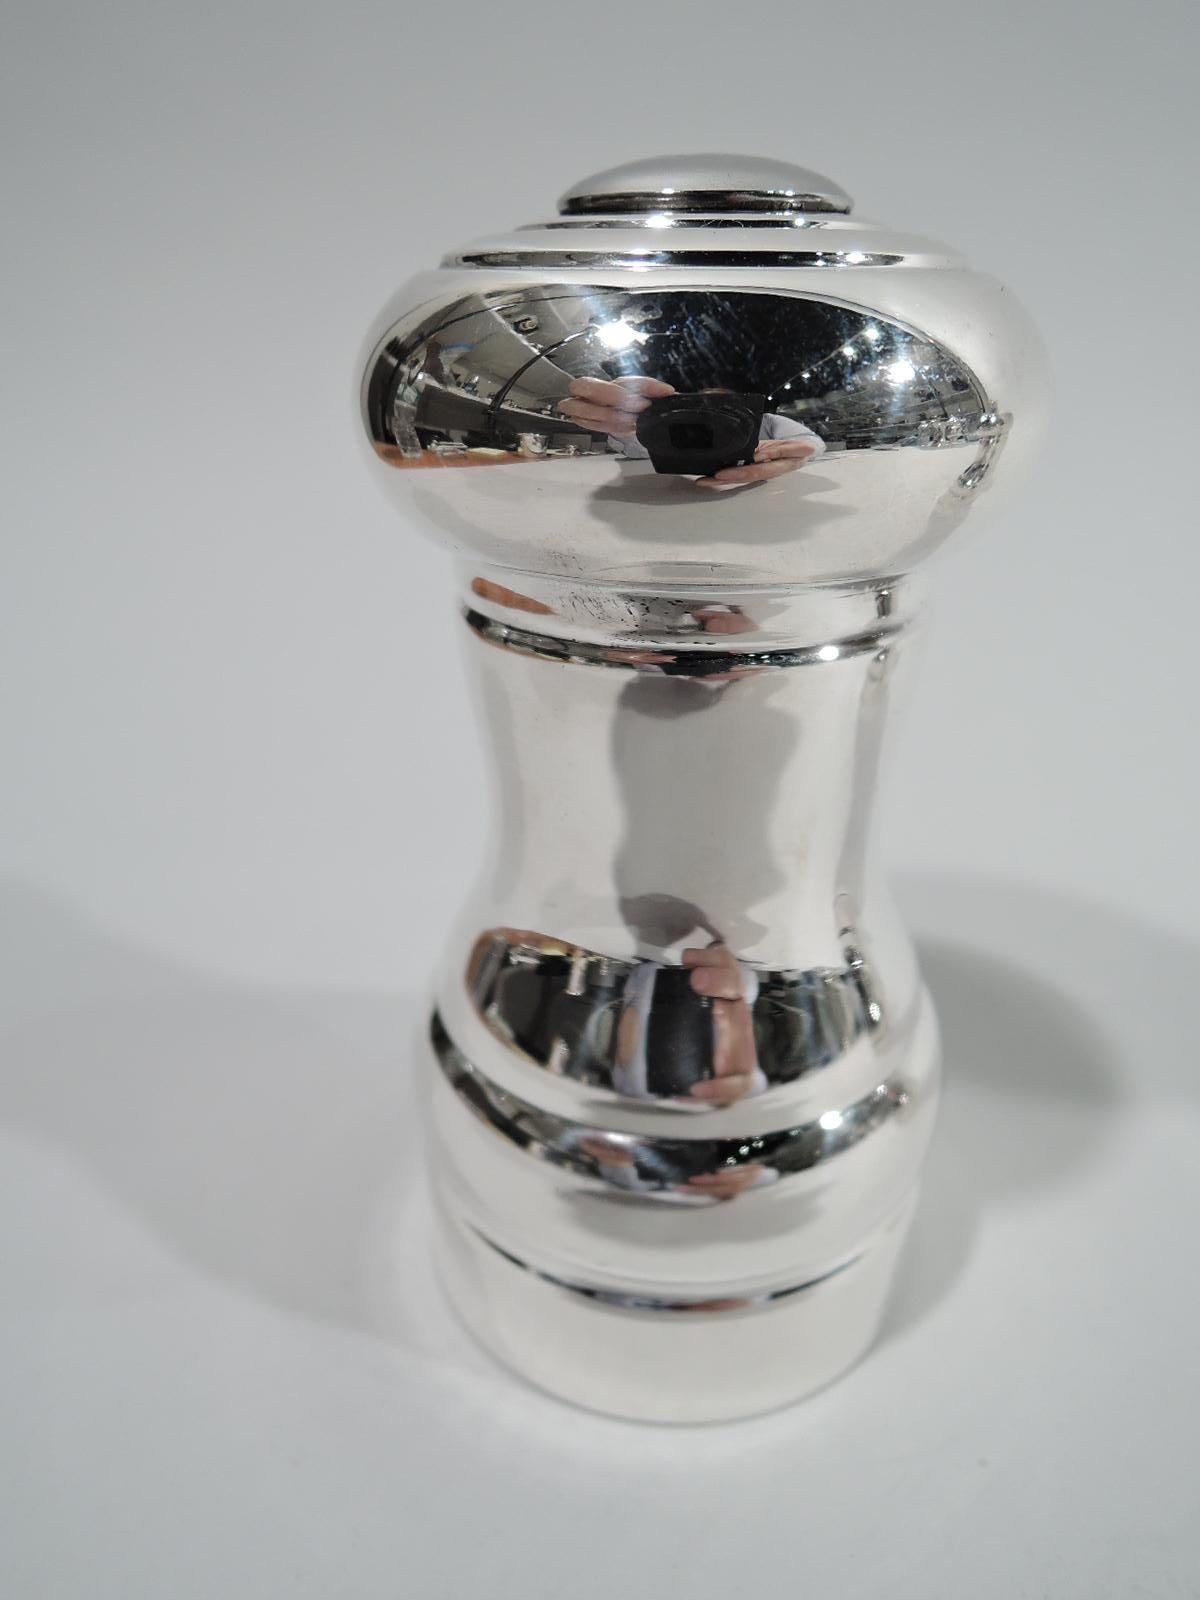 Modern sterling silver salt and pepper. Each: Waisted column with round and bellied top. Salt: Top has pierced center and concentric rings. Bottom has cork plug. Pepper: Rotating top with threaded finial. Marked “Towle Sterling” with nos. 901 (salt)